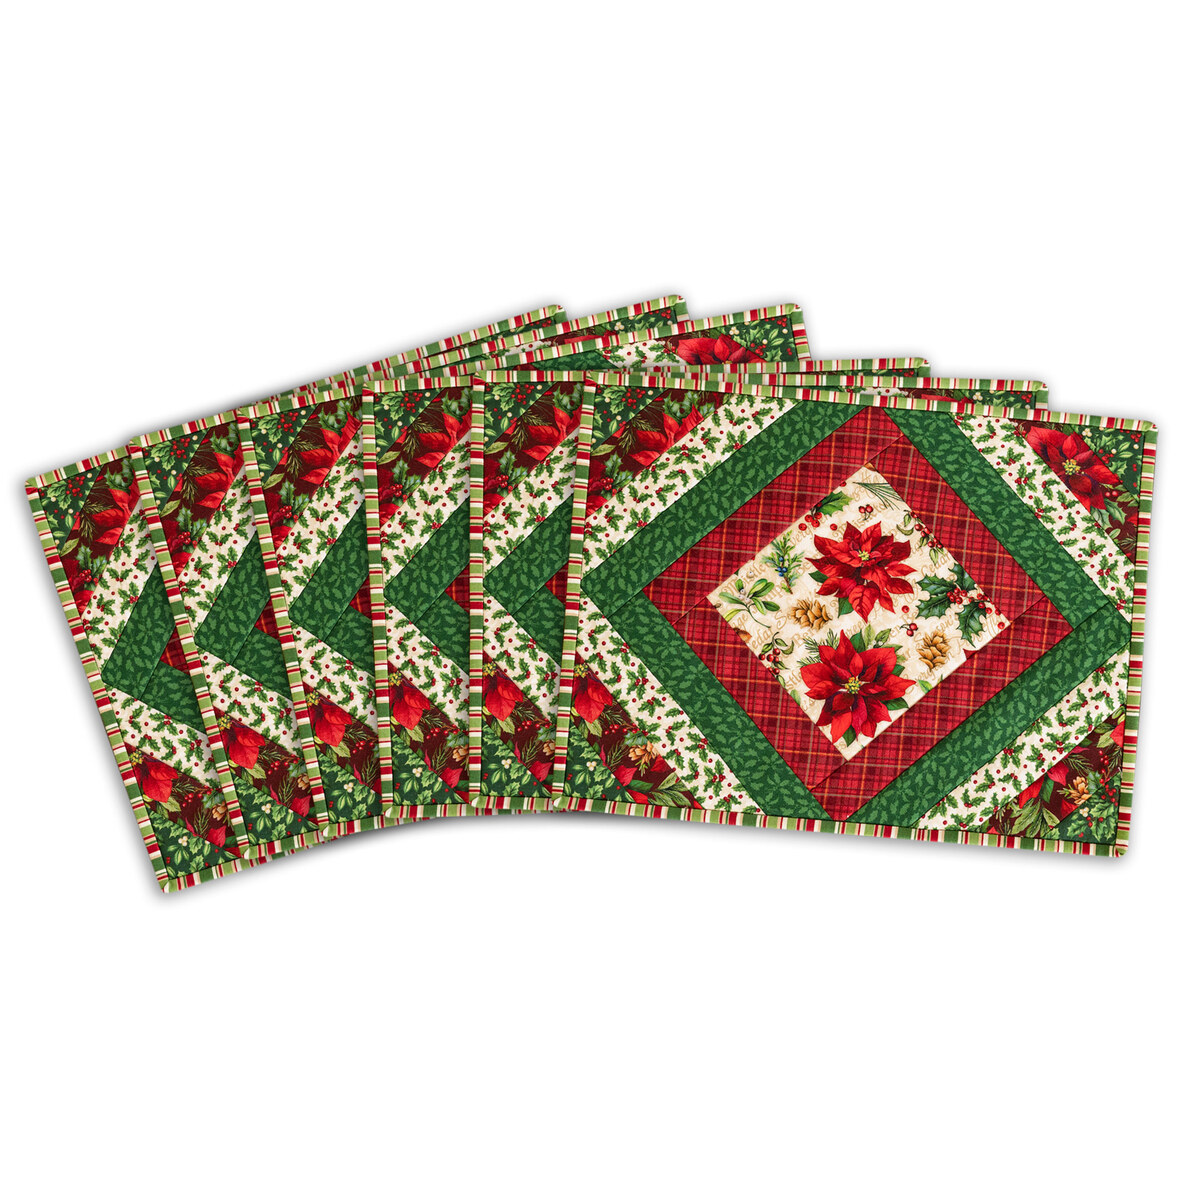 Quilt As You Go - Casablanca Placemats Kit - Postcard Holiday